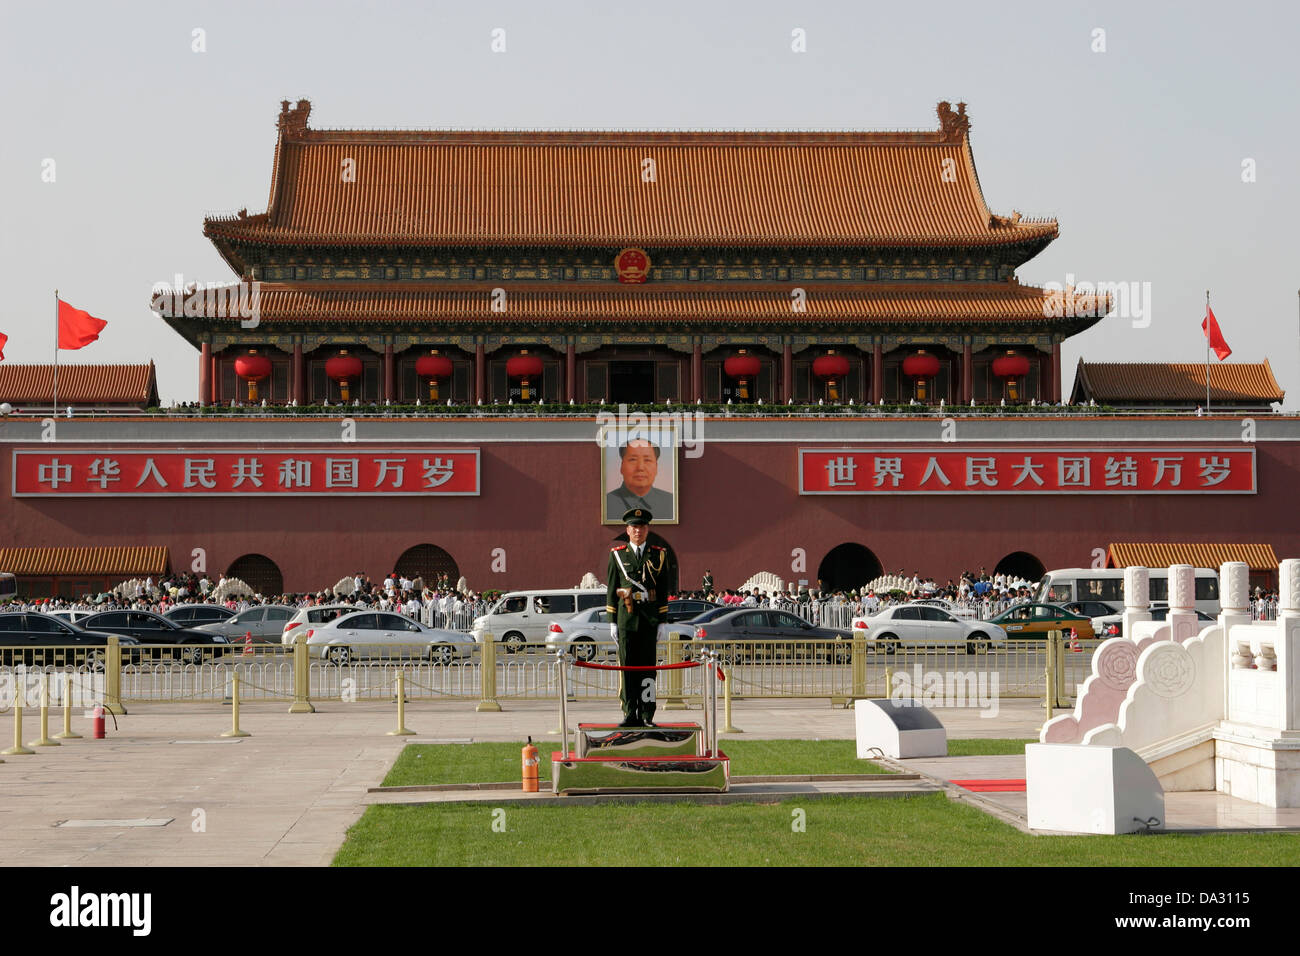 Chinese soldier standing in front of the Gate of Heavenly Peace,  entrance to Forbidden City, Tiananmen Square, Beijing, China Stock Photo